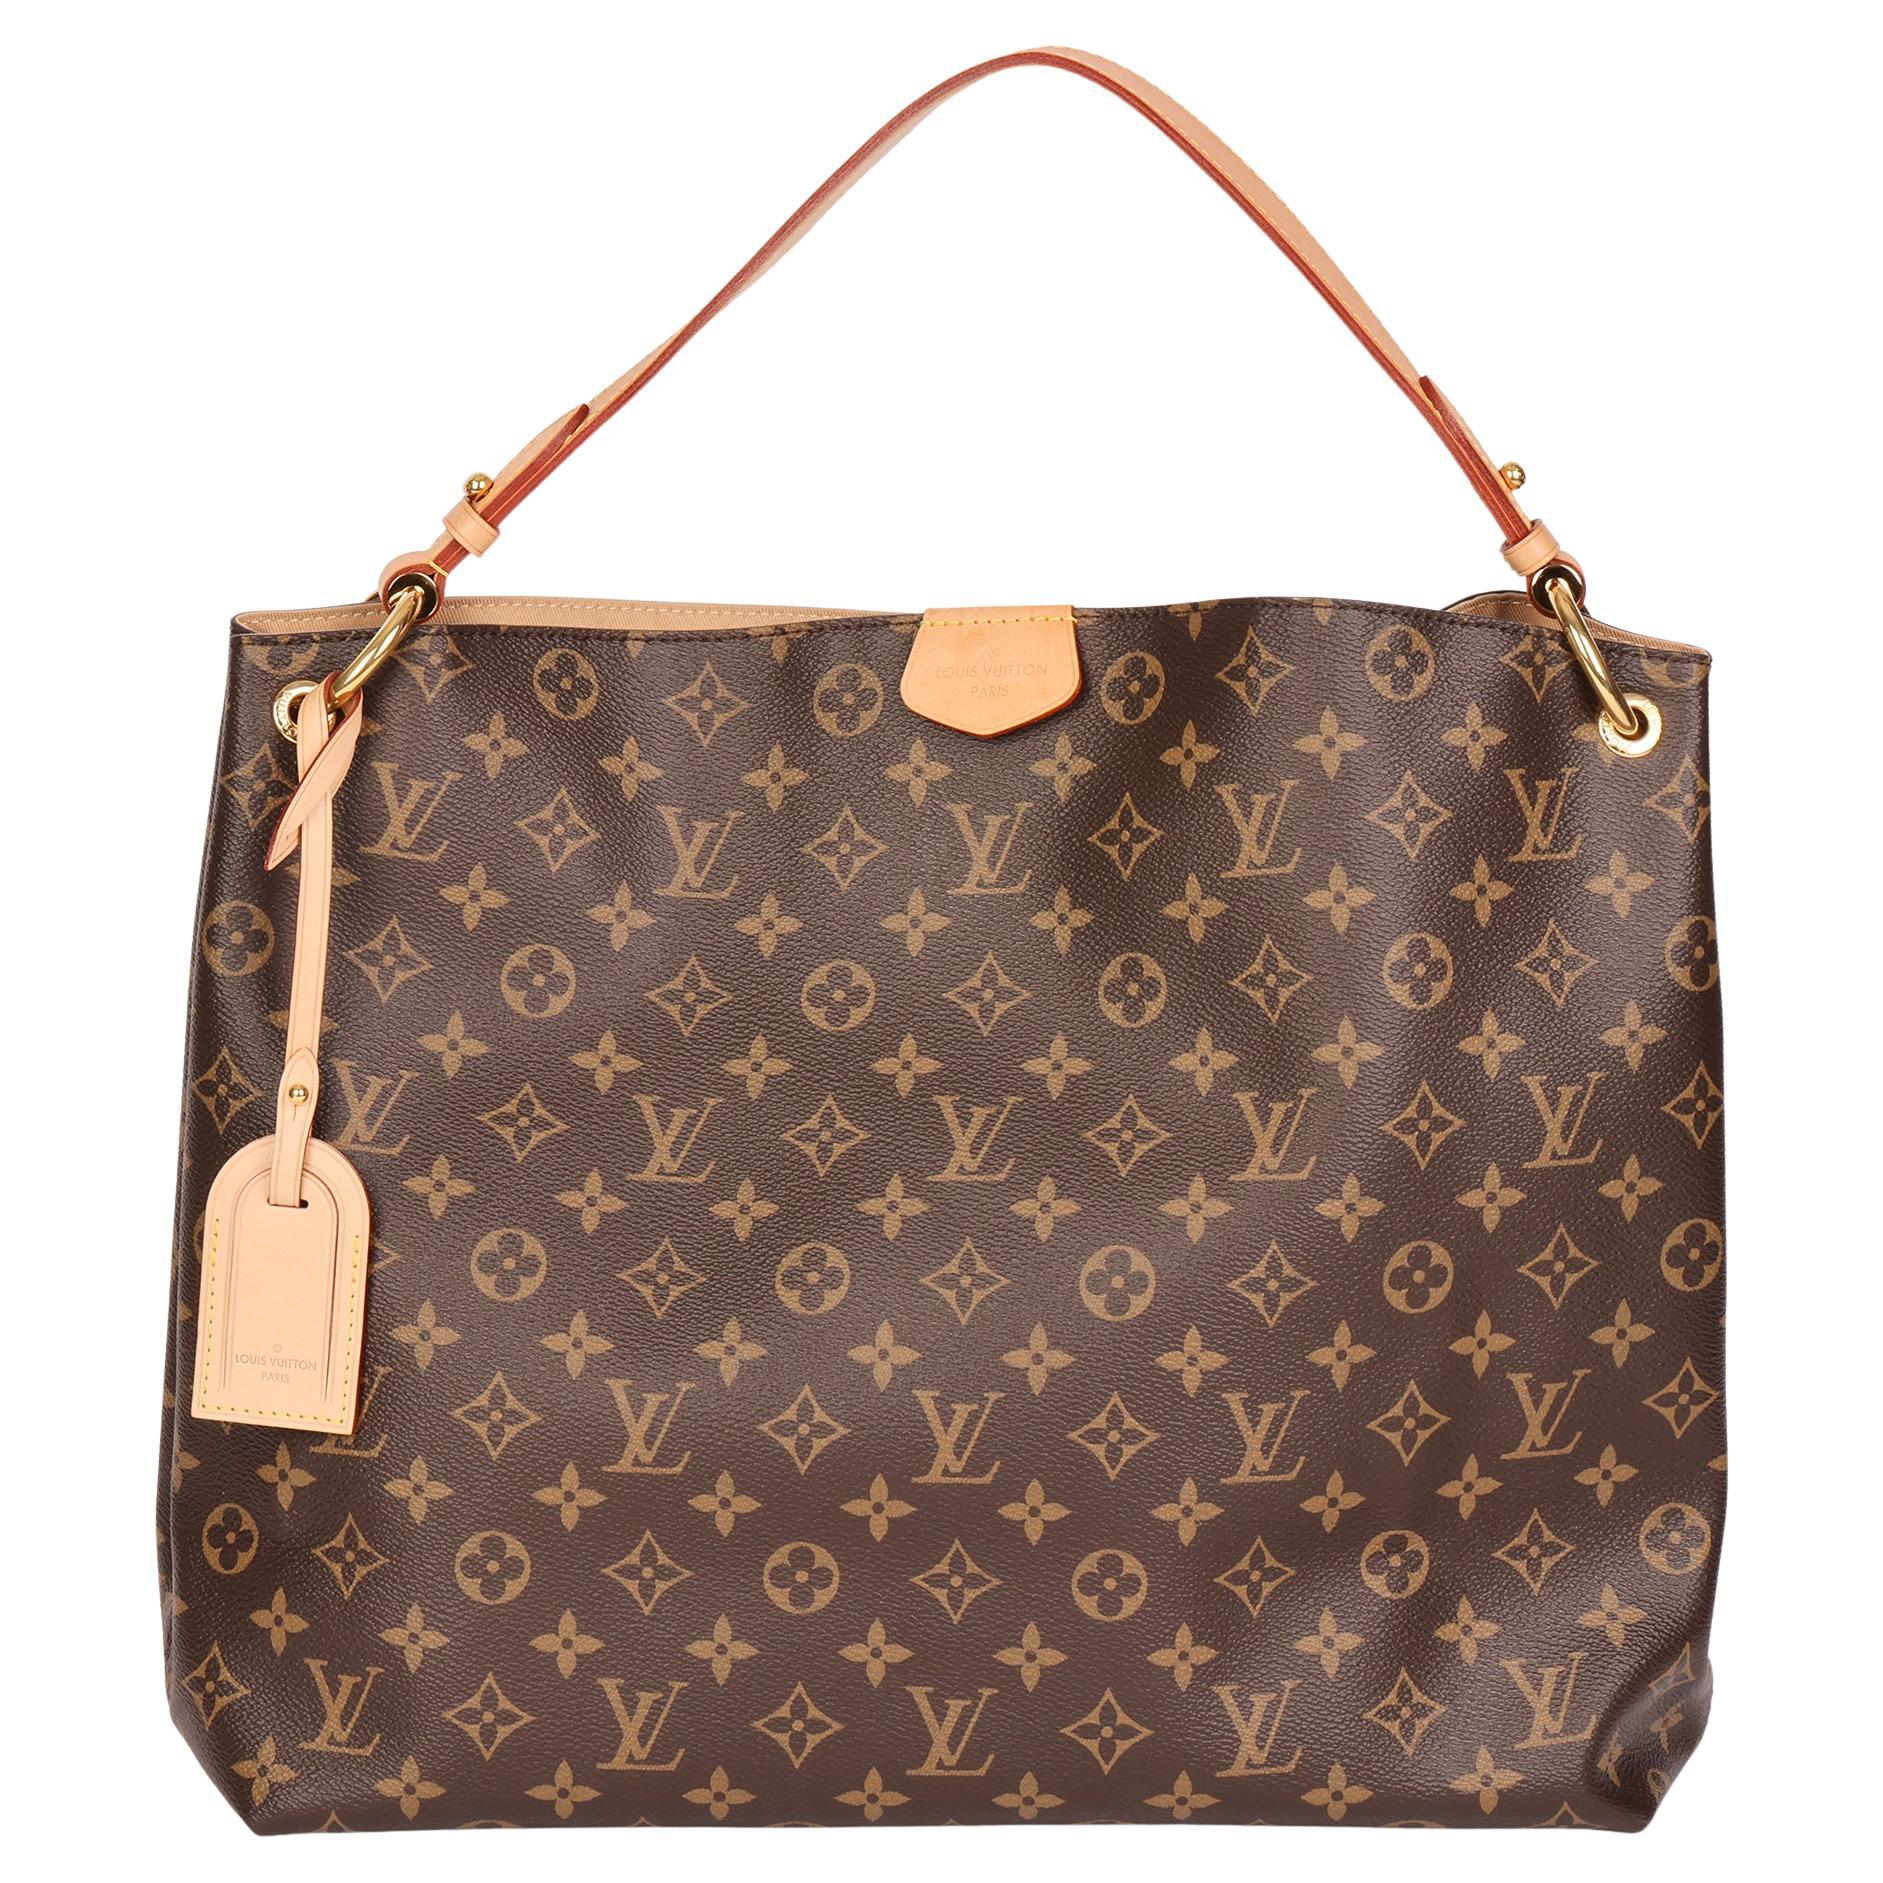 LOUIS VUITTON Brown Monogram Coated Canvas & Natural Calfskin Leather Graceful M